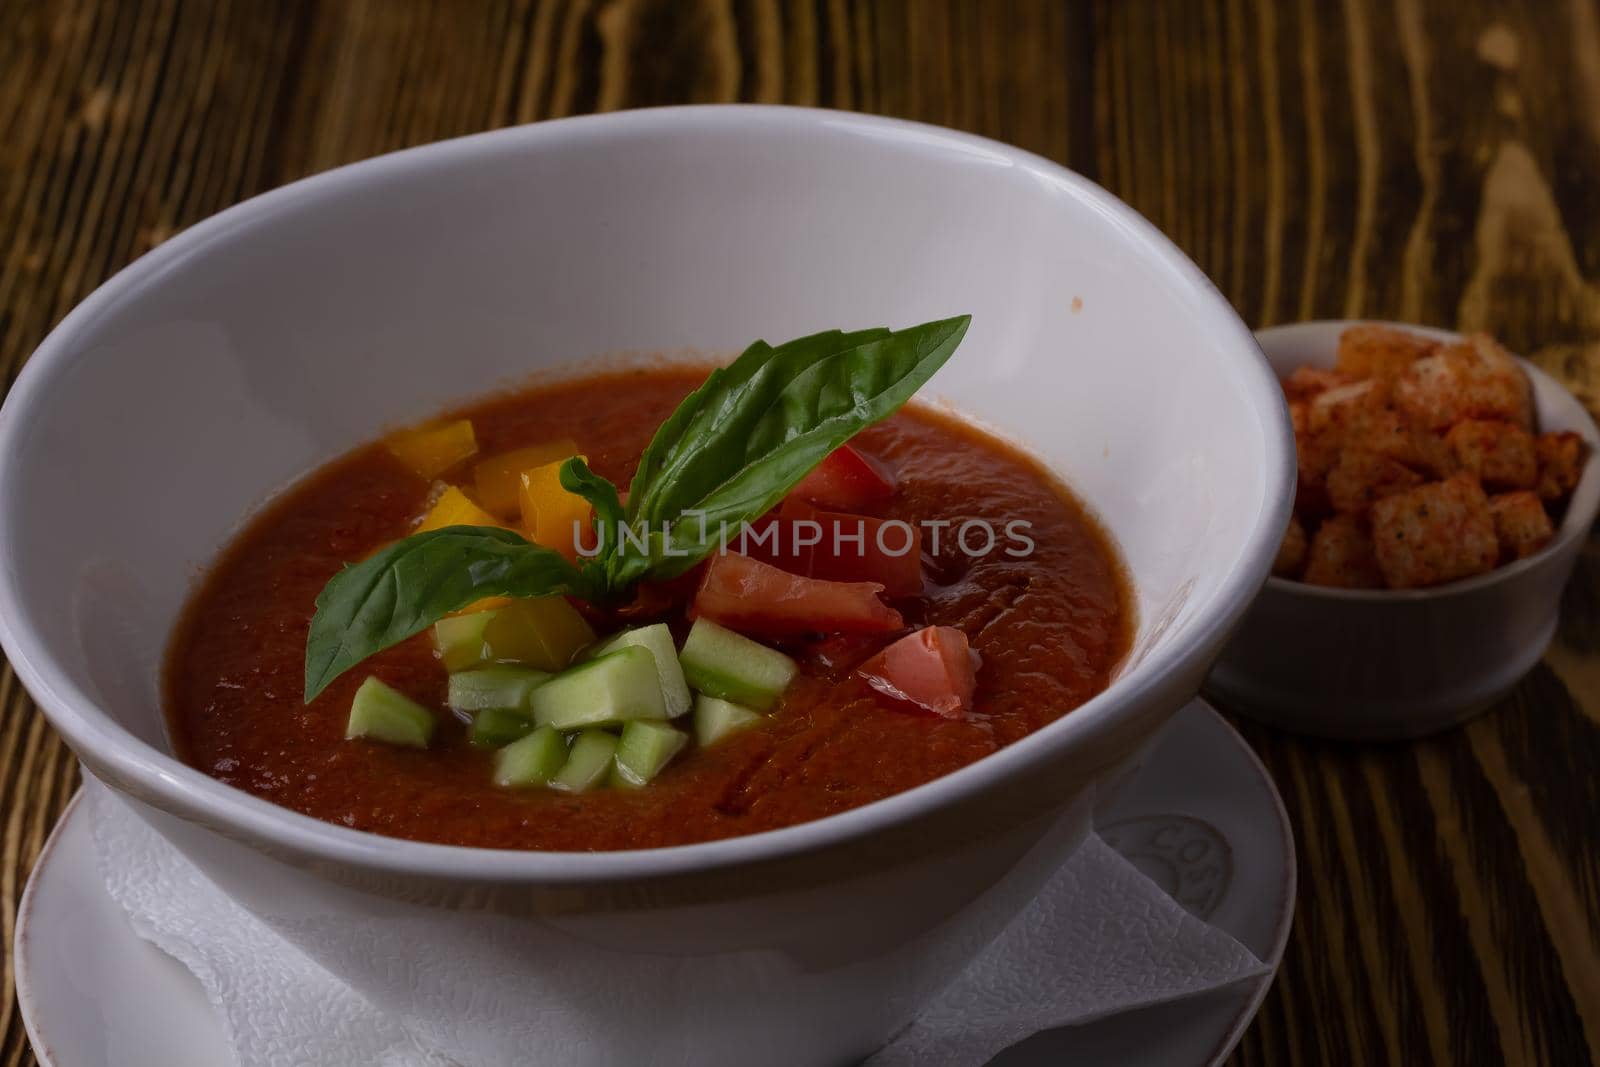 Raw tomato soup, typical food of Spain, served in white bowls with pieces of tomato, cucumber and paprika. Wooden background by Milanchikov